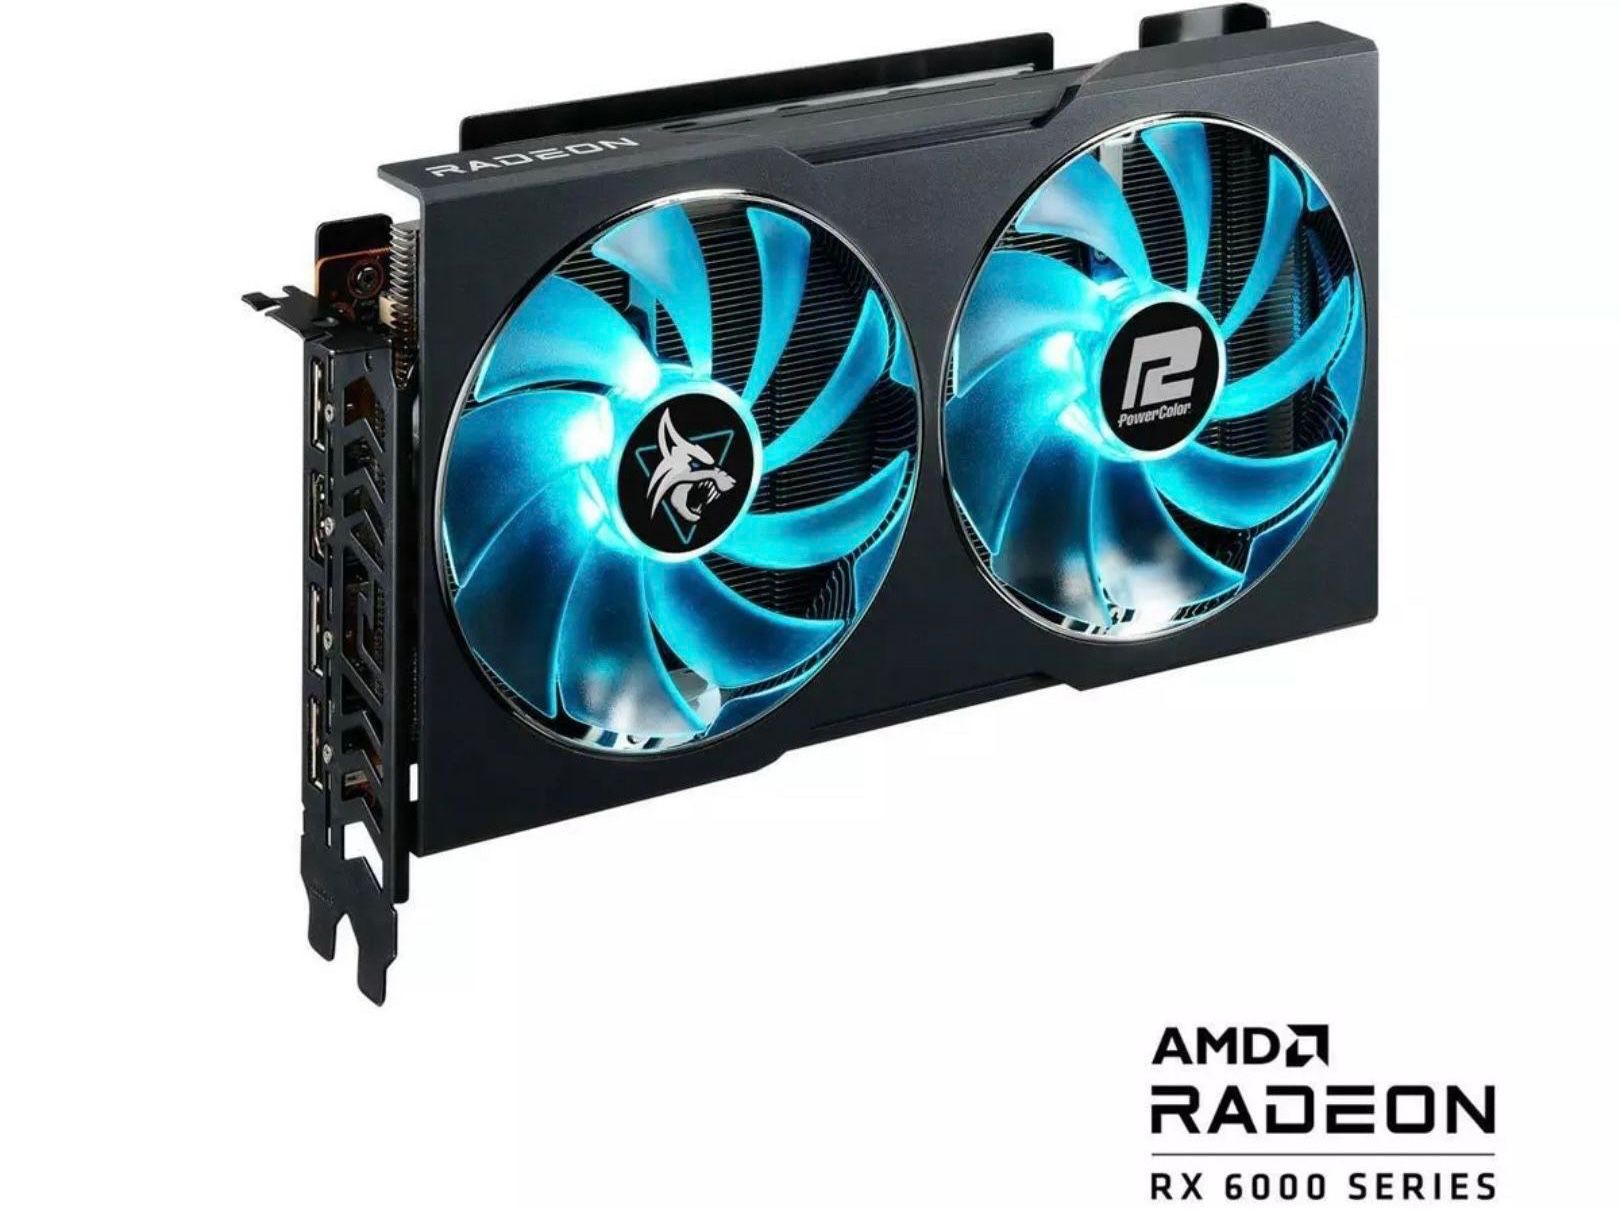 PowerColor Hellhound AMD Radeon RX 6600 Gaming Graphics Card with 8GB GDDR6 Memory, Powered by AMD RDNA 2, HDMI 2.1